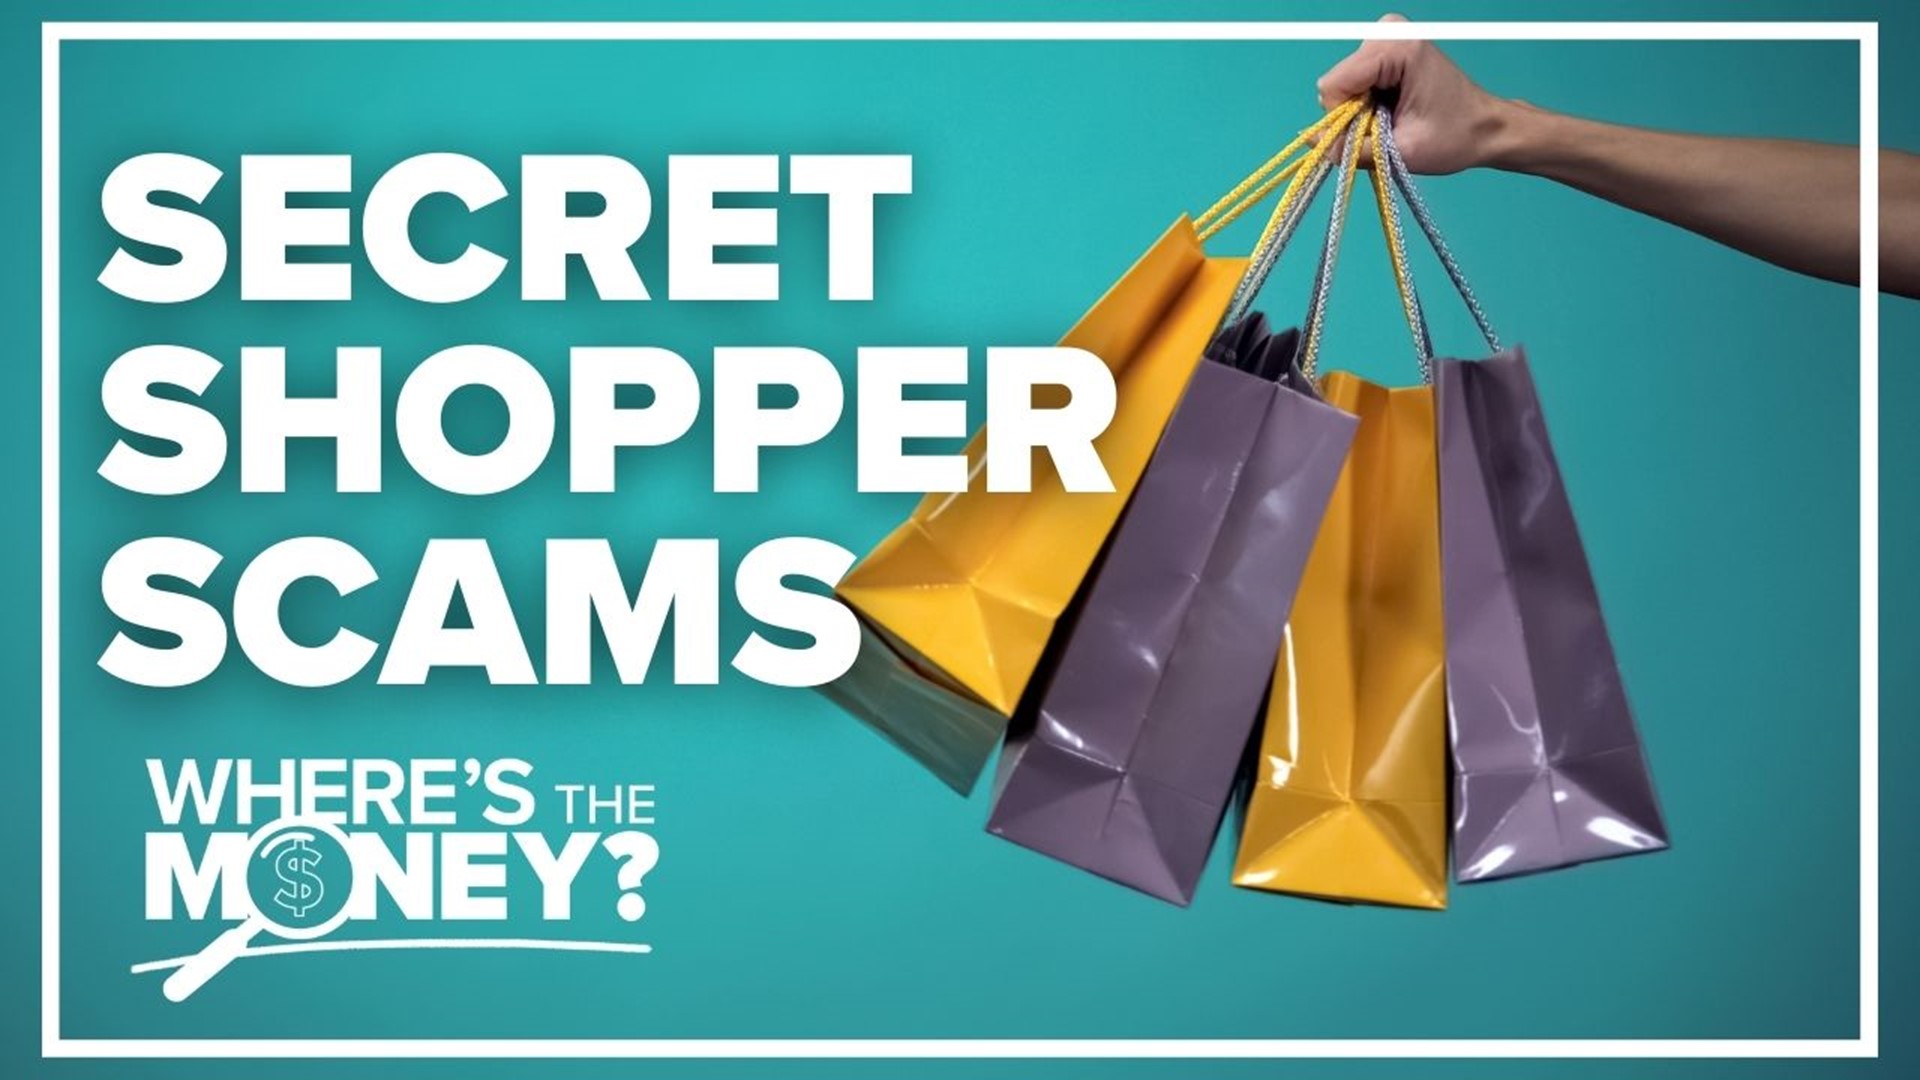 Secret shoppers are a not-so-secret part of the retail industry, but some new scams are popping up that seem too good to be true.